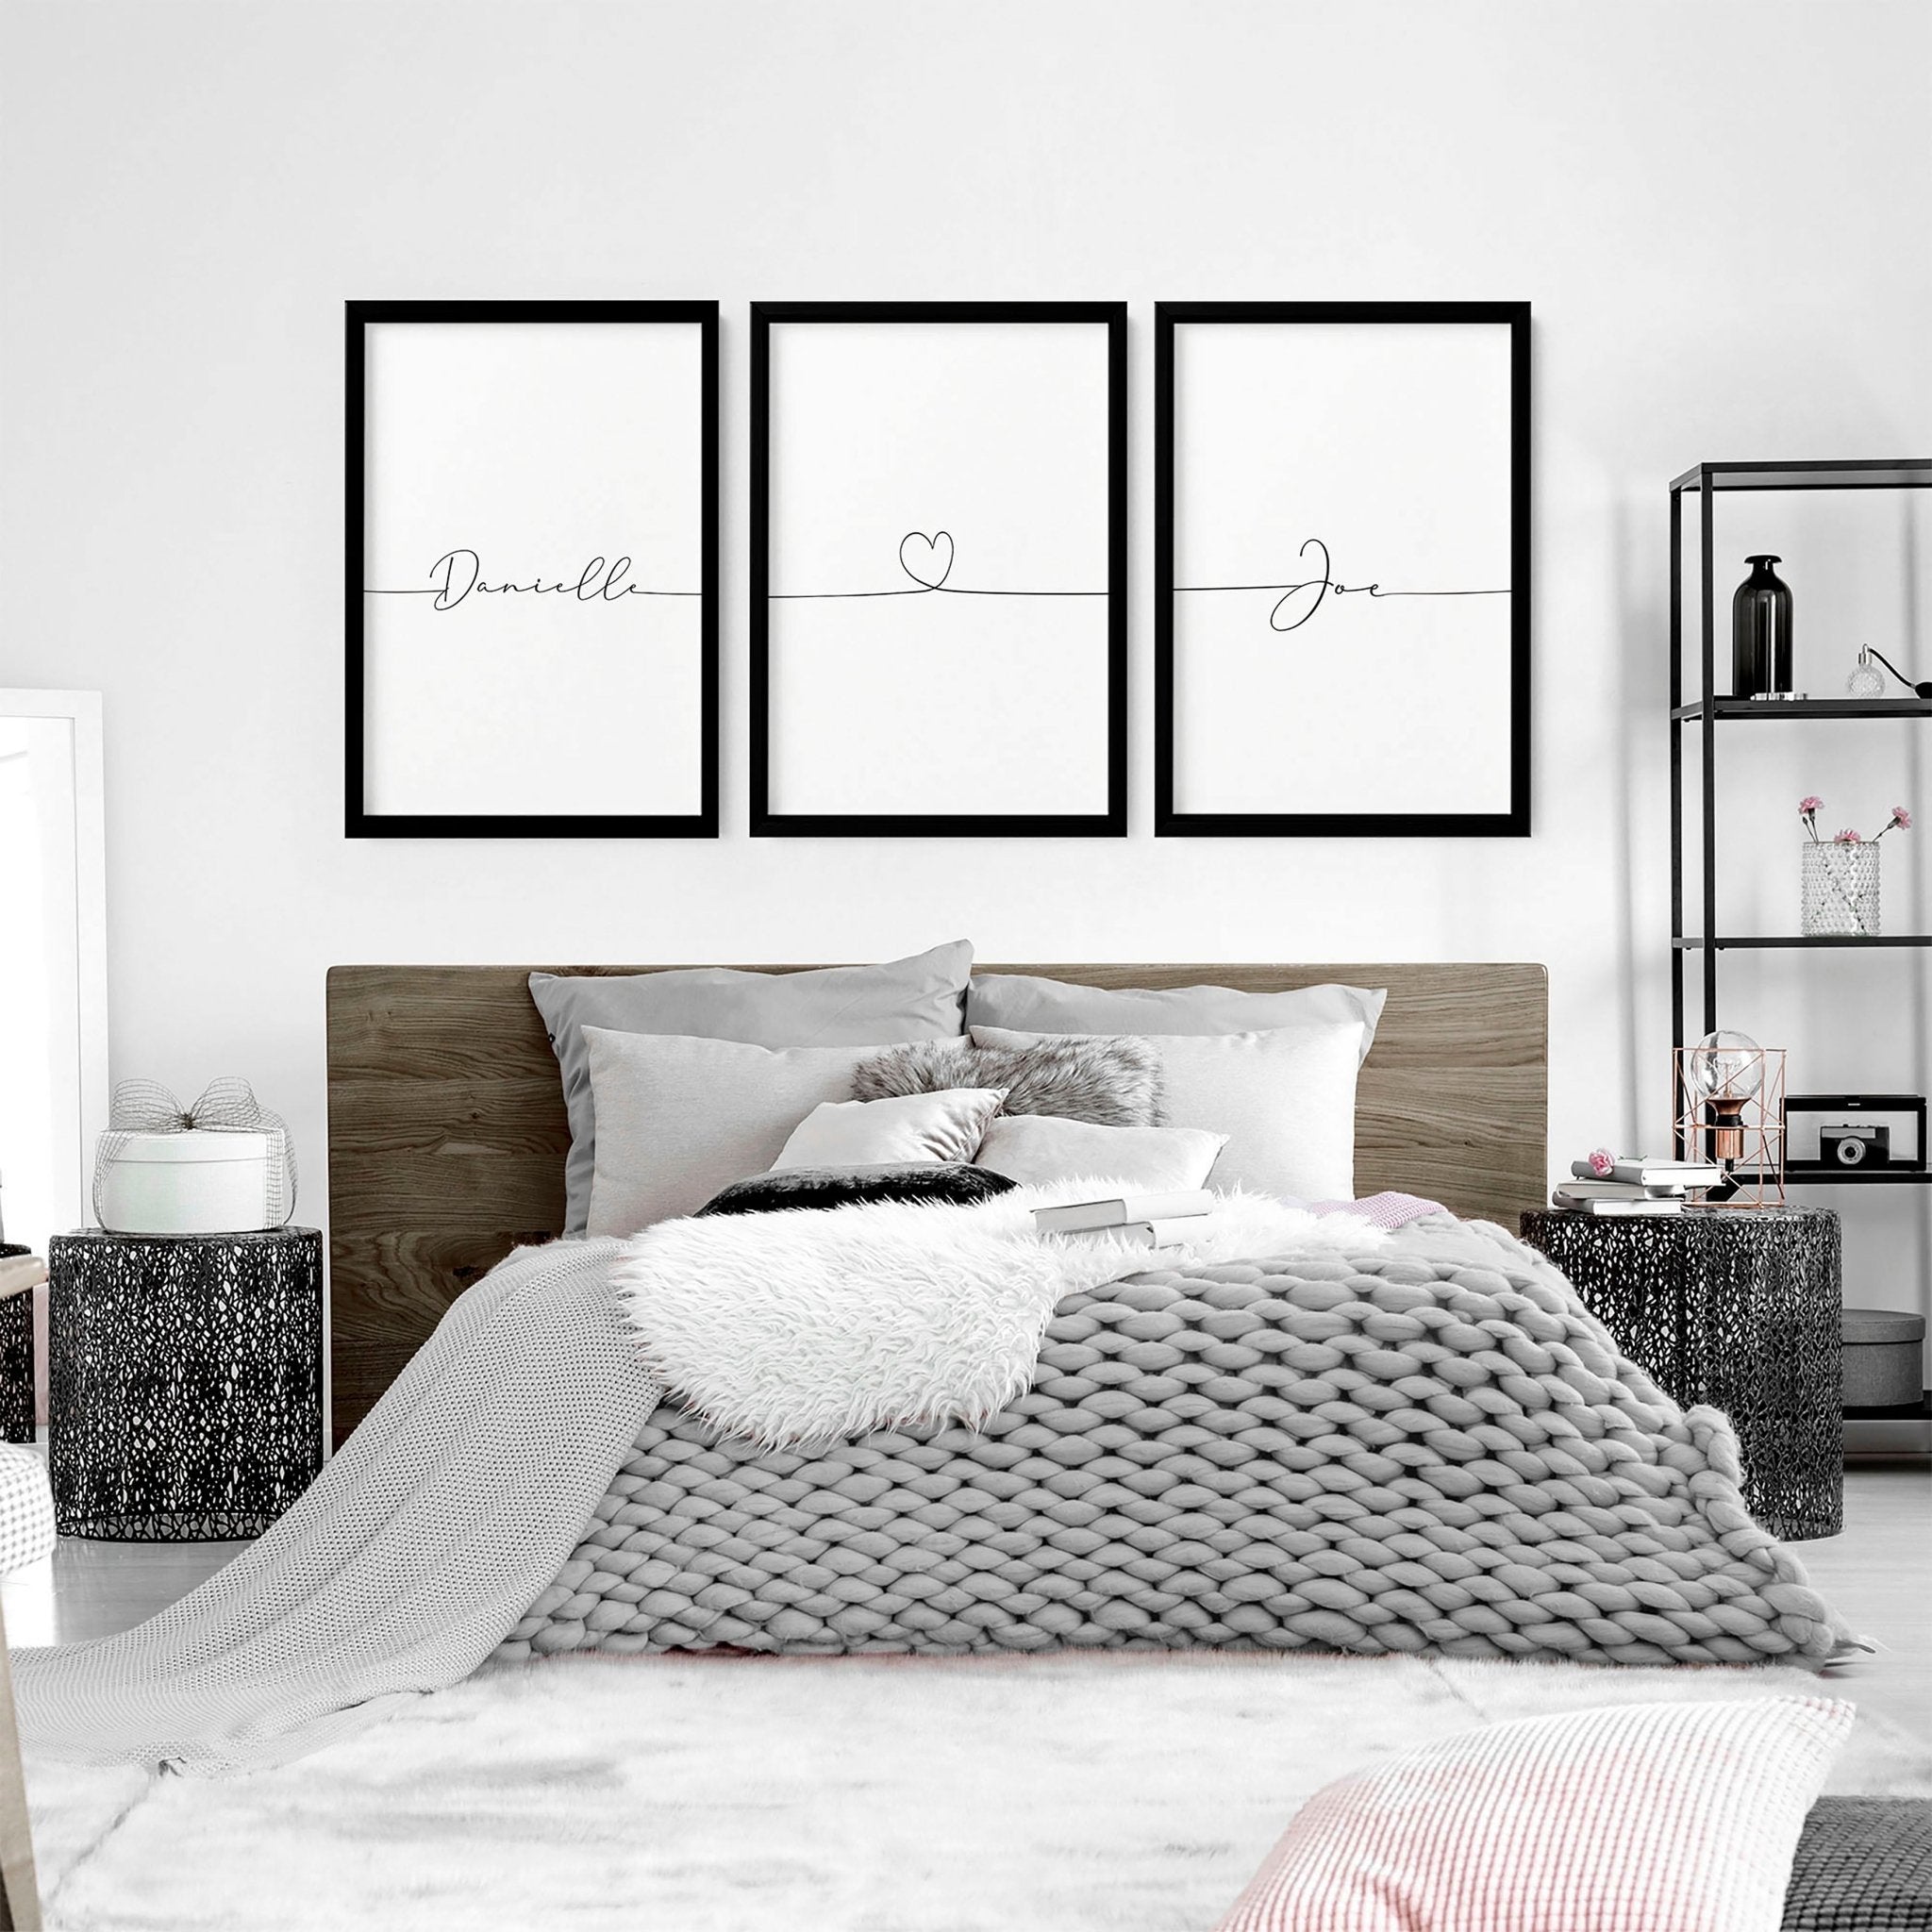 Customized valentines gift | set of 3 wall art prints for Bedroom - About Wall Art